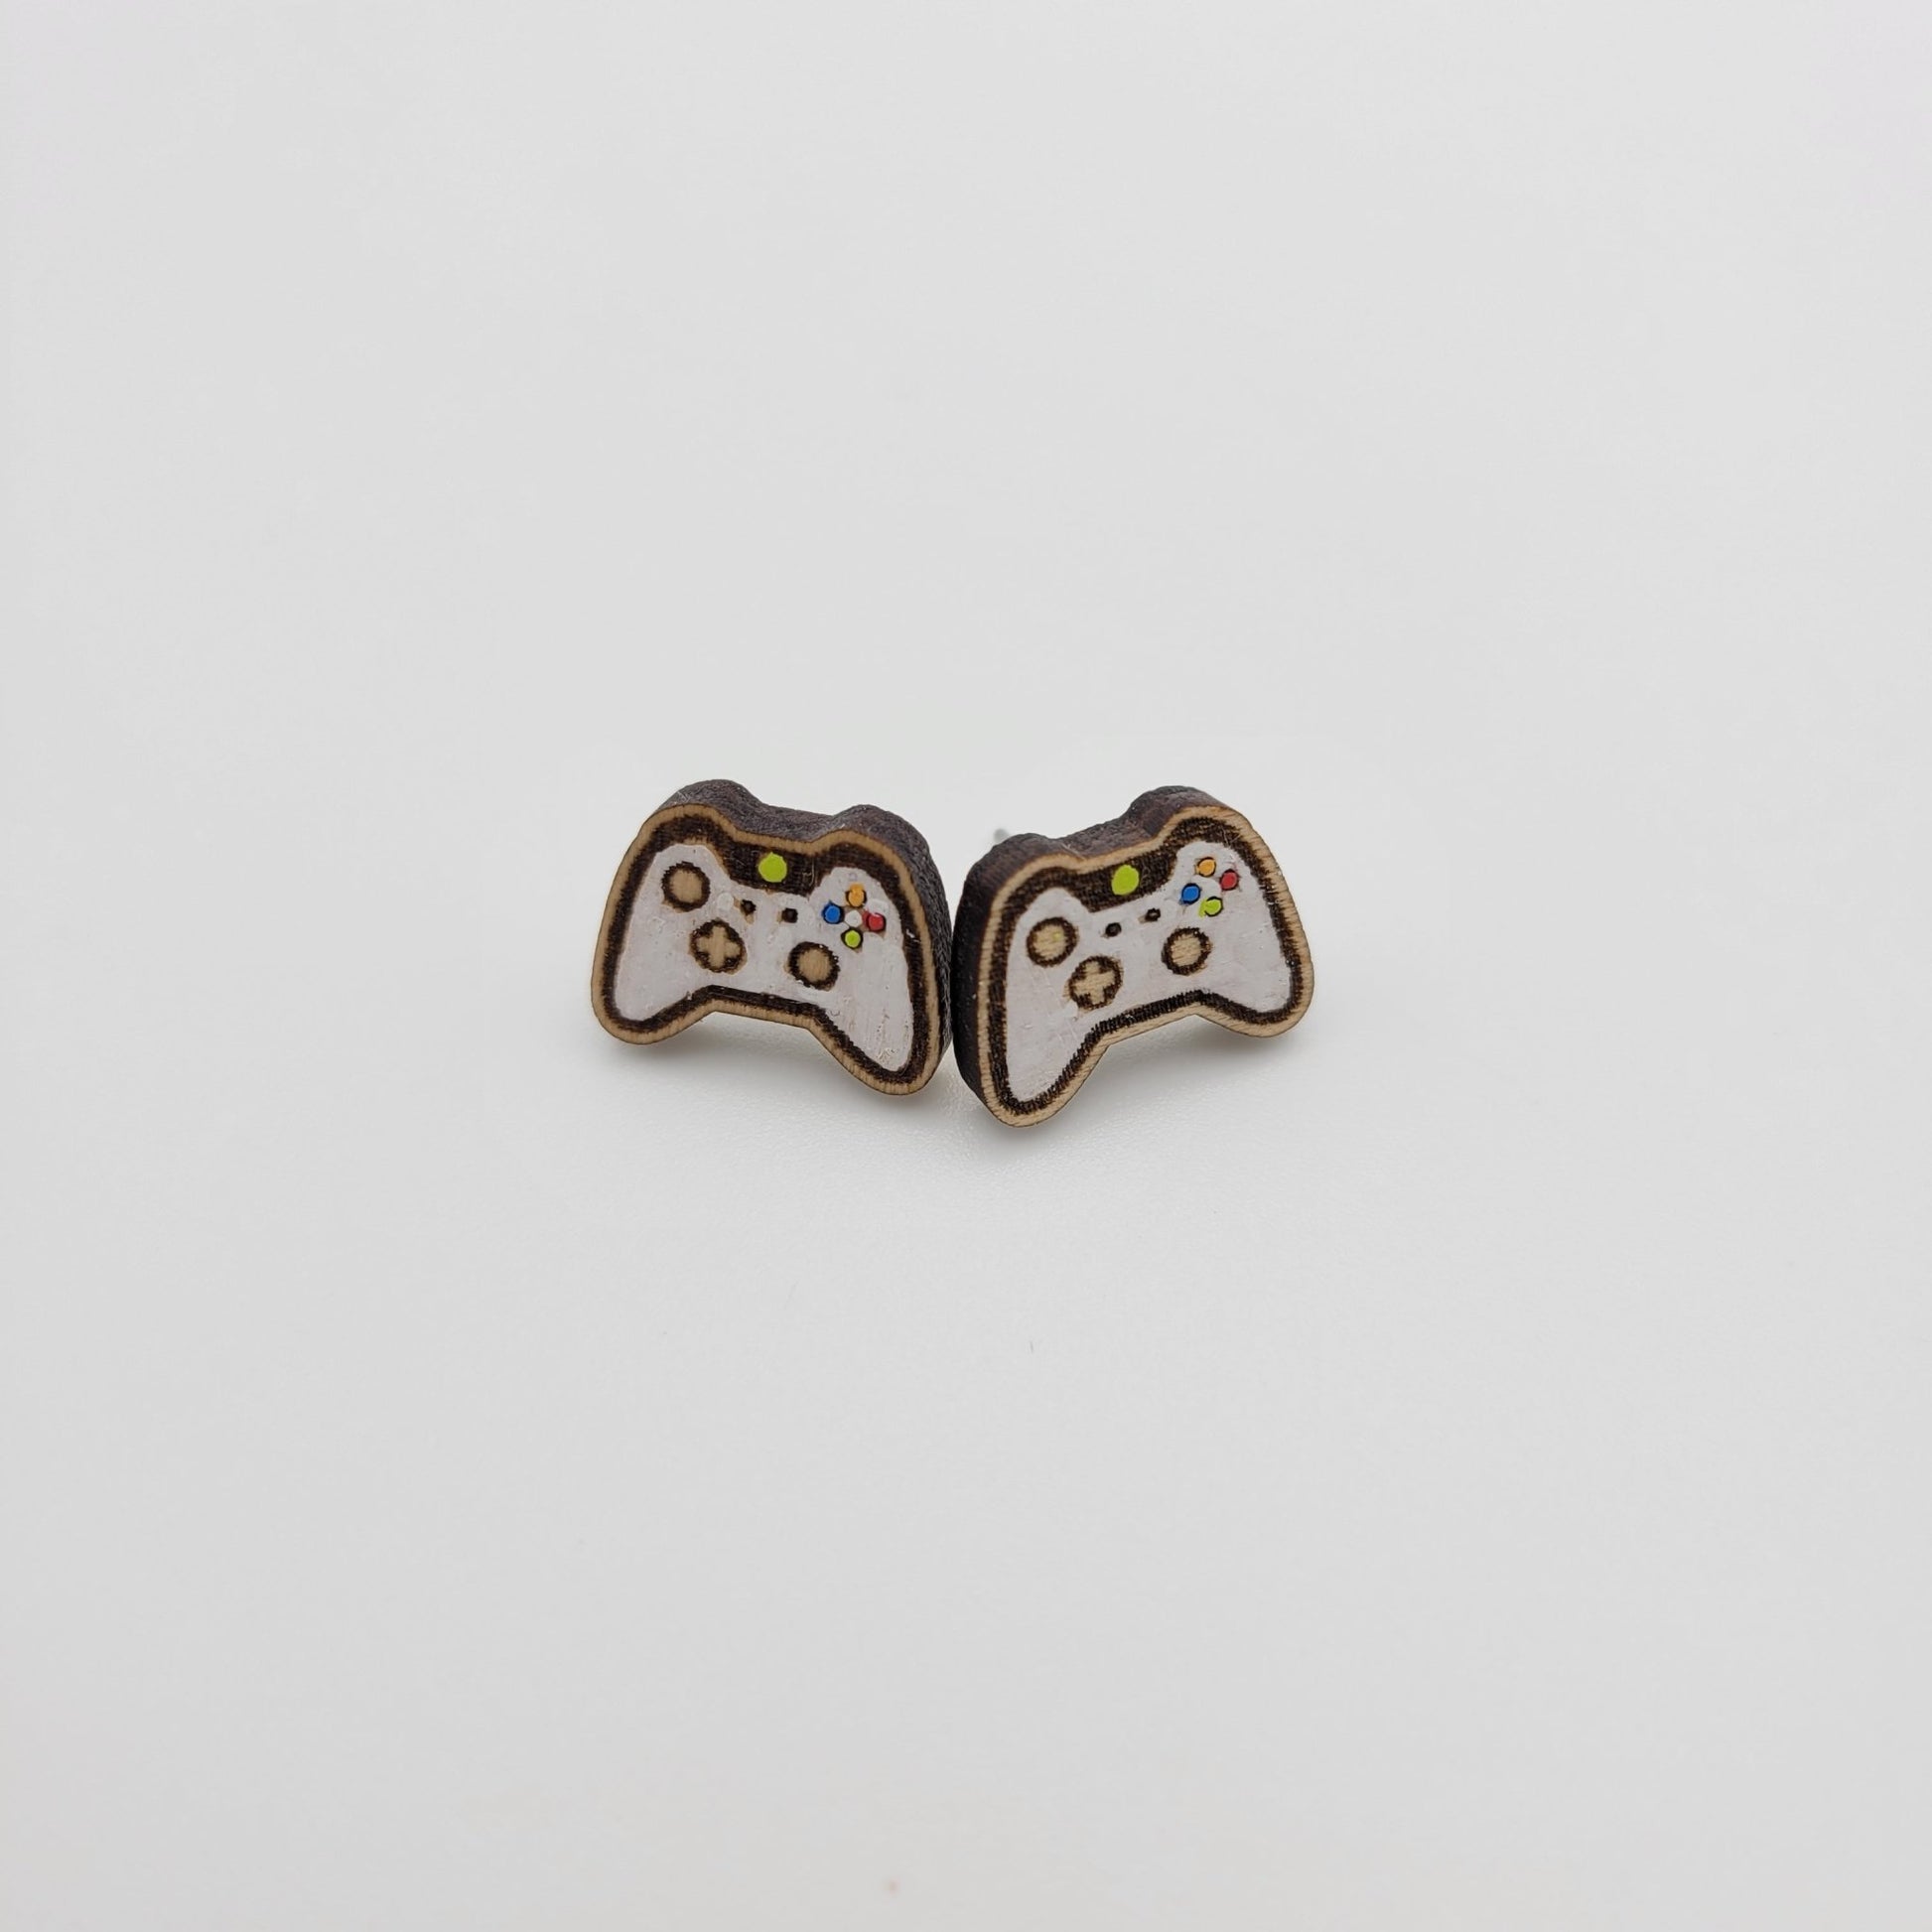 Hand Painted Video Game Controller Stud Earrings - 4 Arrows Creations